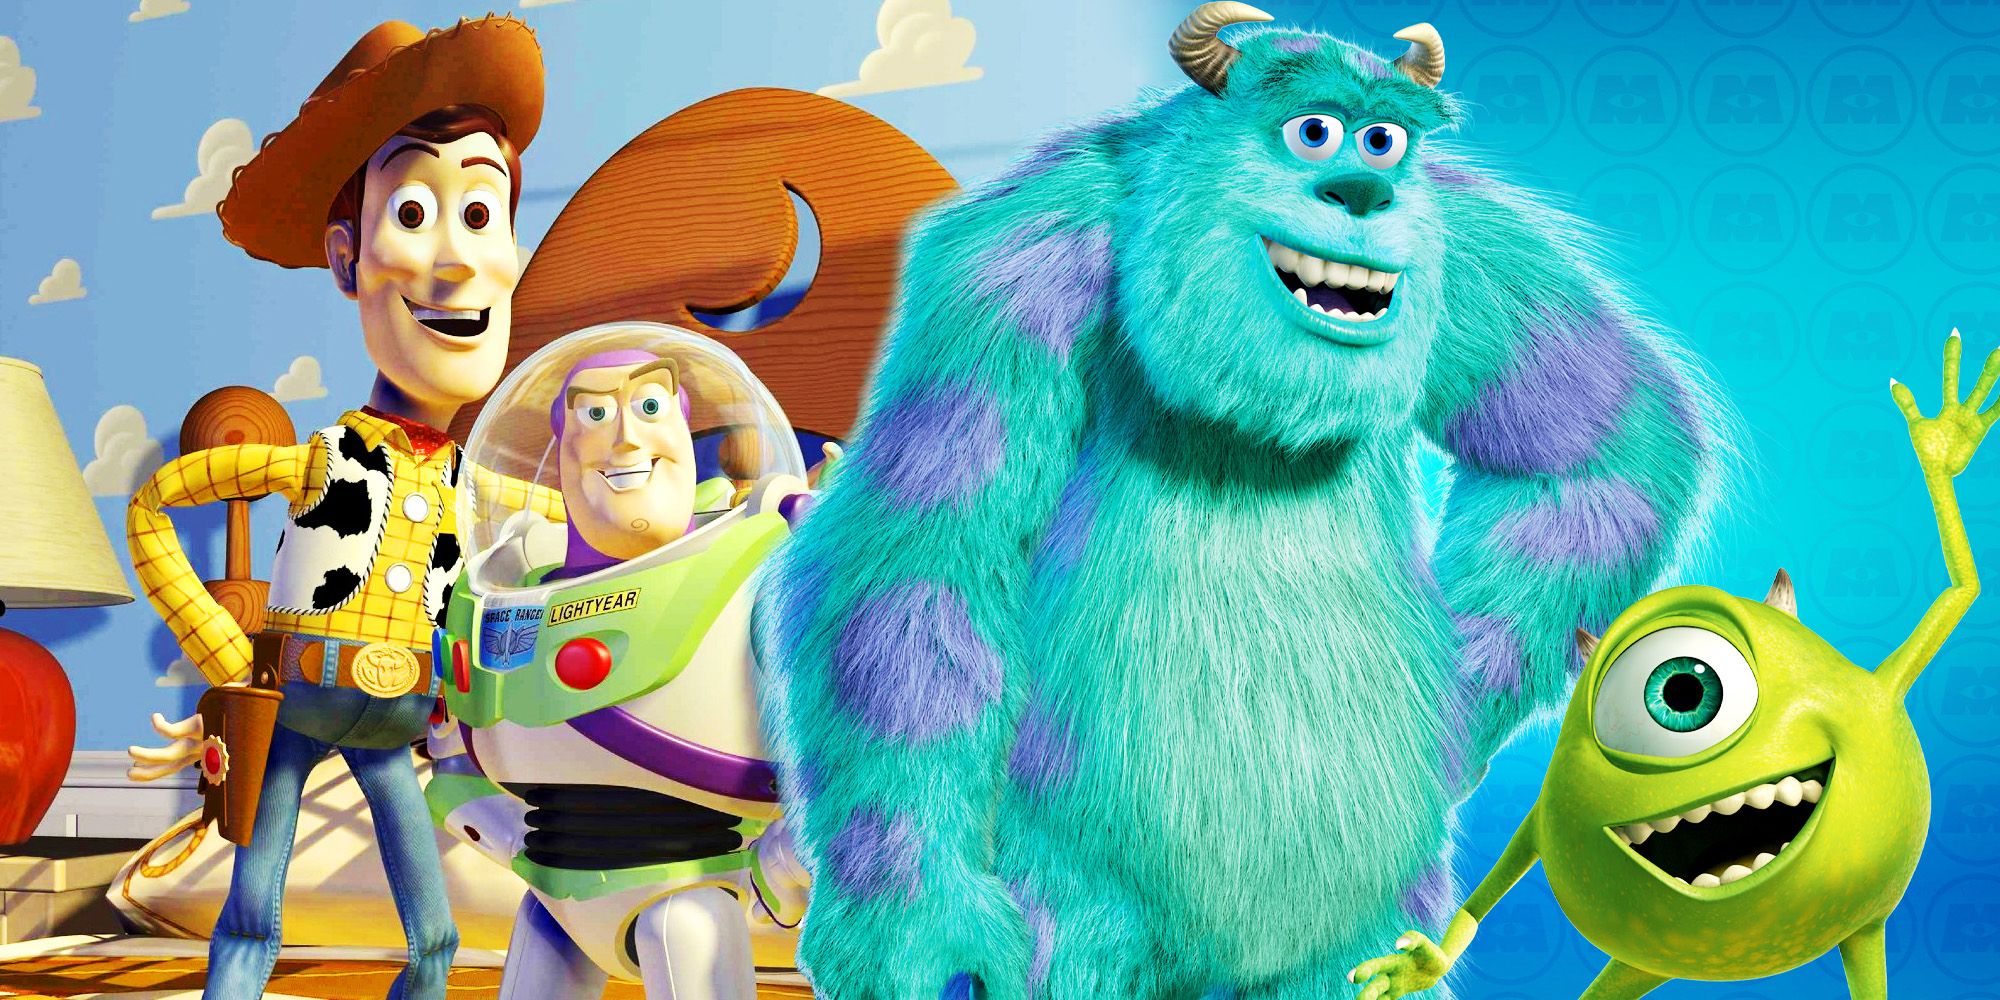 A custom image of Woody and Buzz Lightyear from Toy Story next to Sulley and Mike from Monsters, Inc.